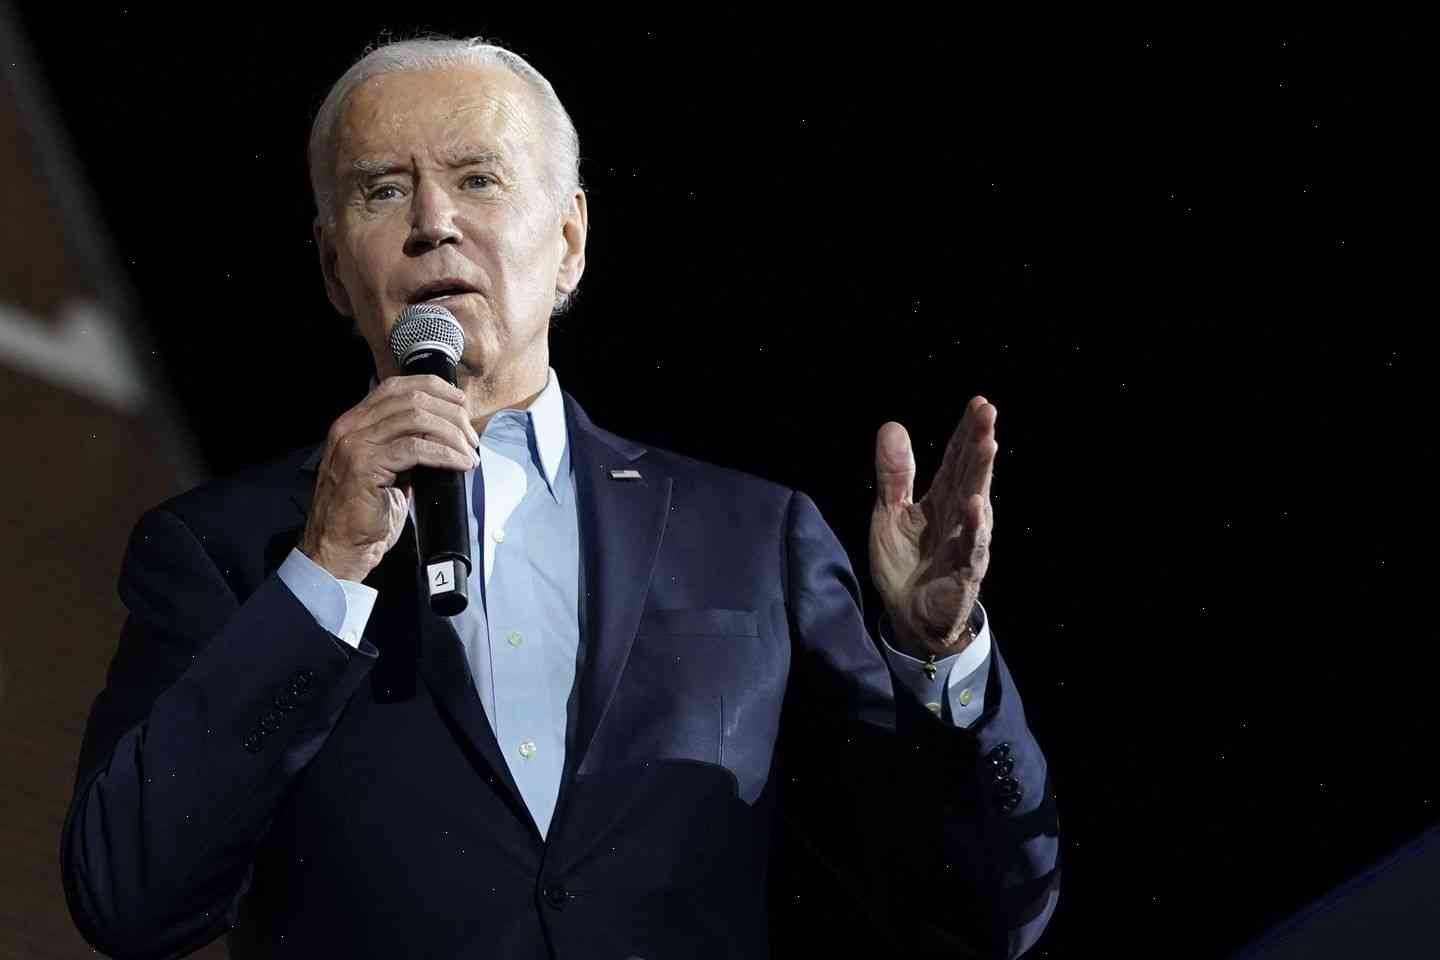 Greg Schultz’s alleged involvement in the Whitewater investigation isn’t a part of Biden’s appeal